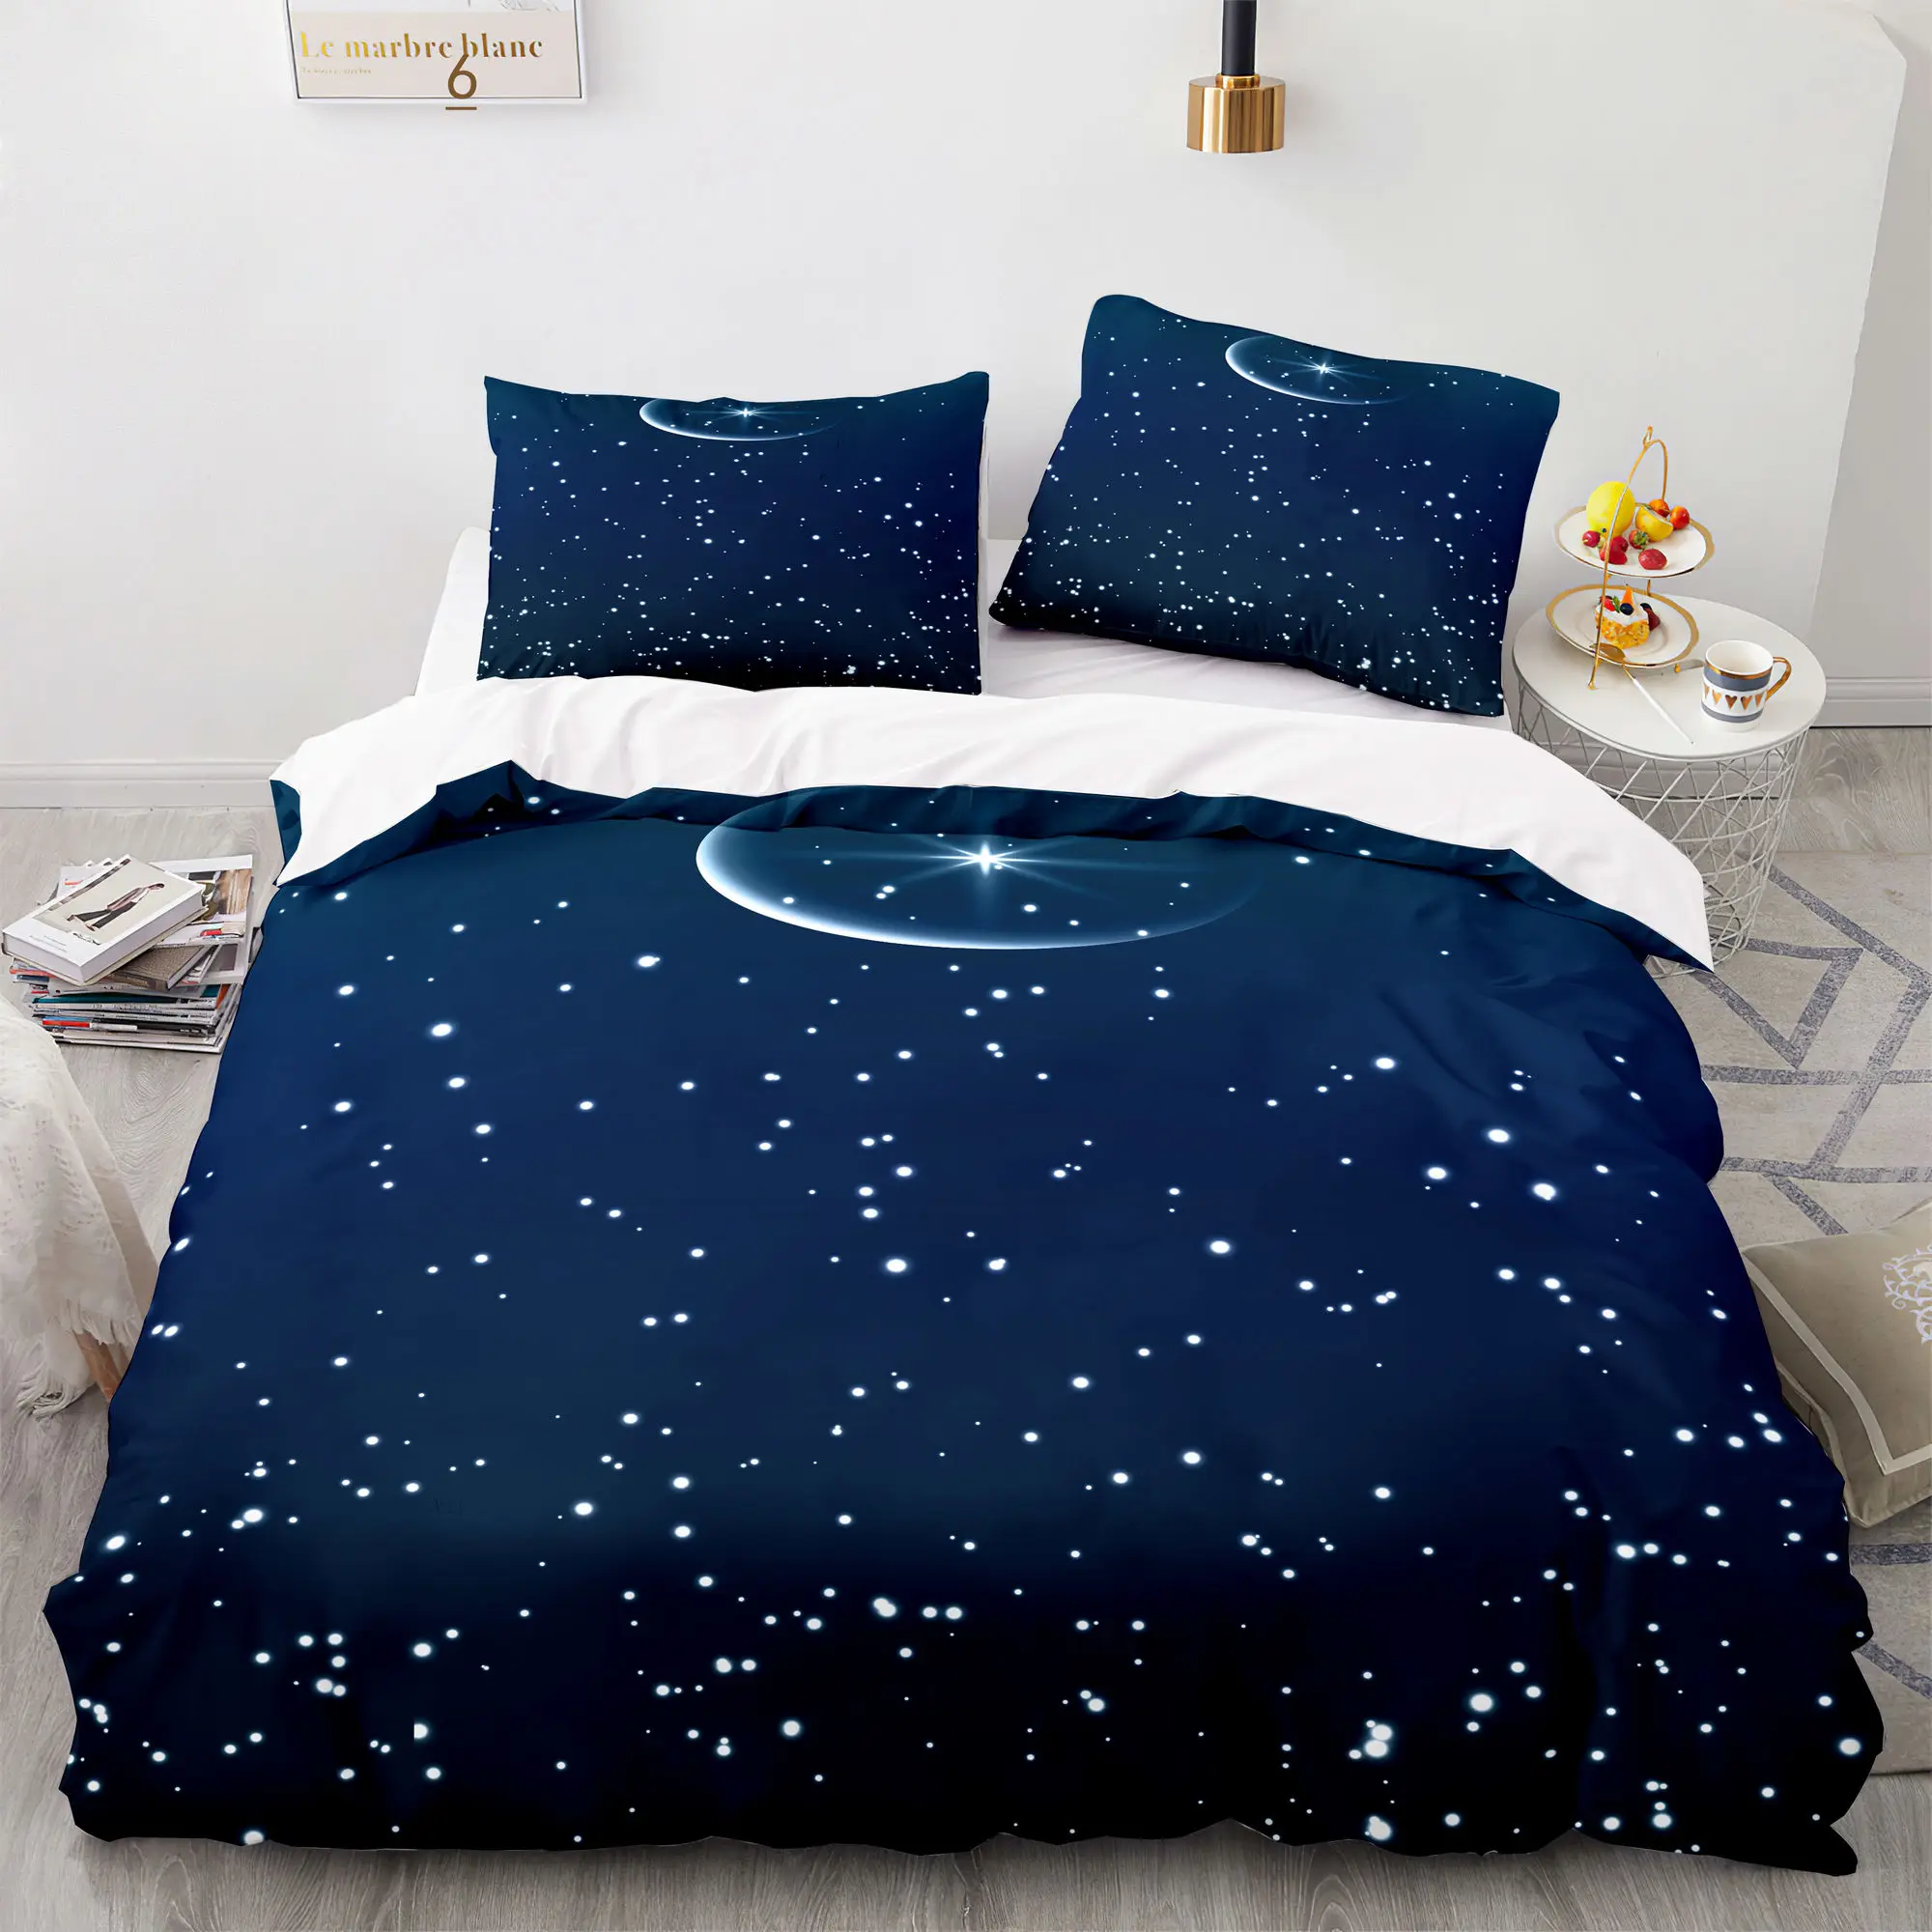 

Moonlight Bedding Set Quilt Cover Twin Full Queen King Size With Pillowcases Bed Set Aldult Kid Bedroom Decor Gift Home